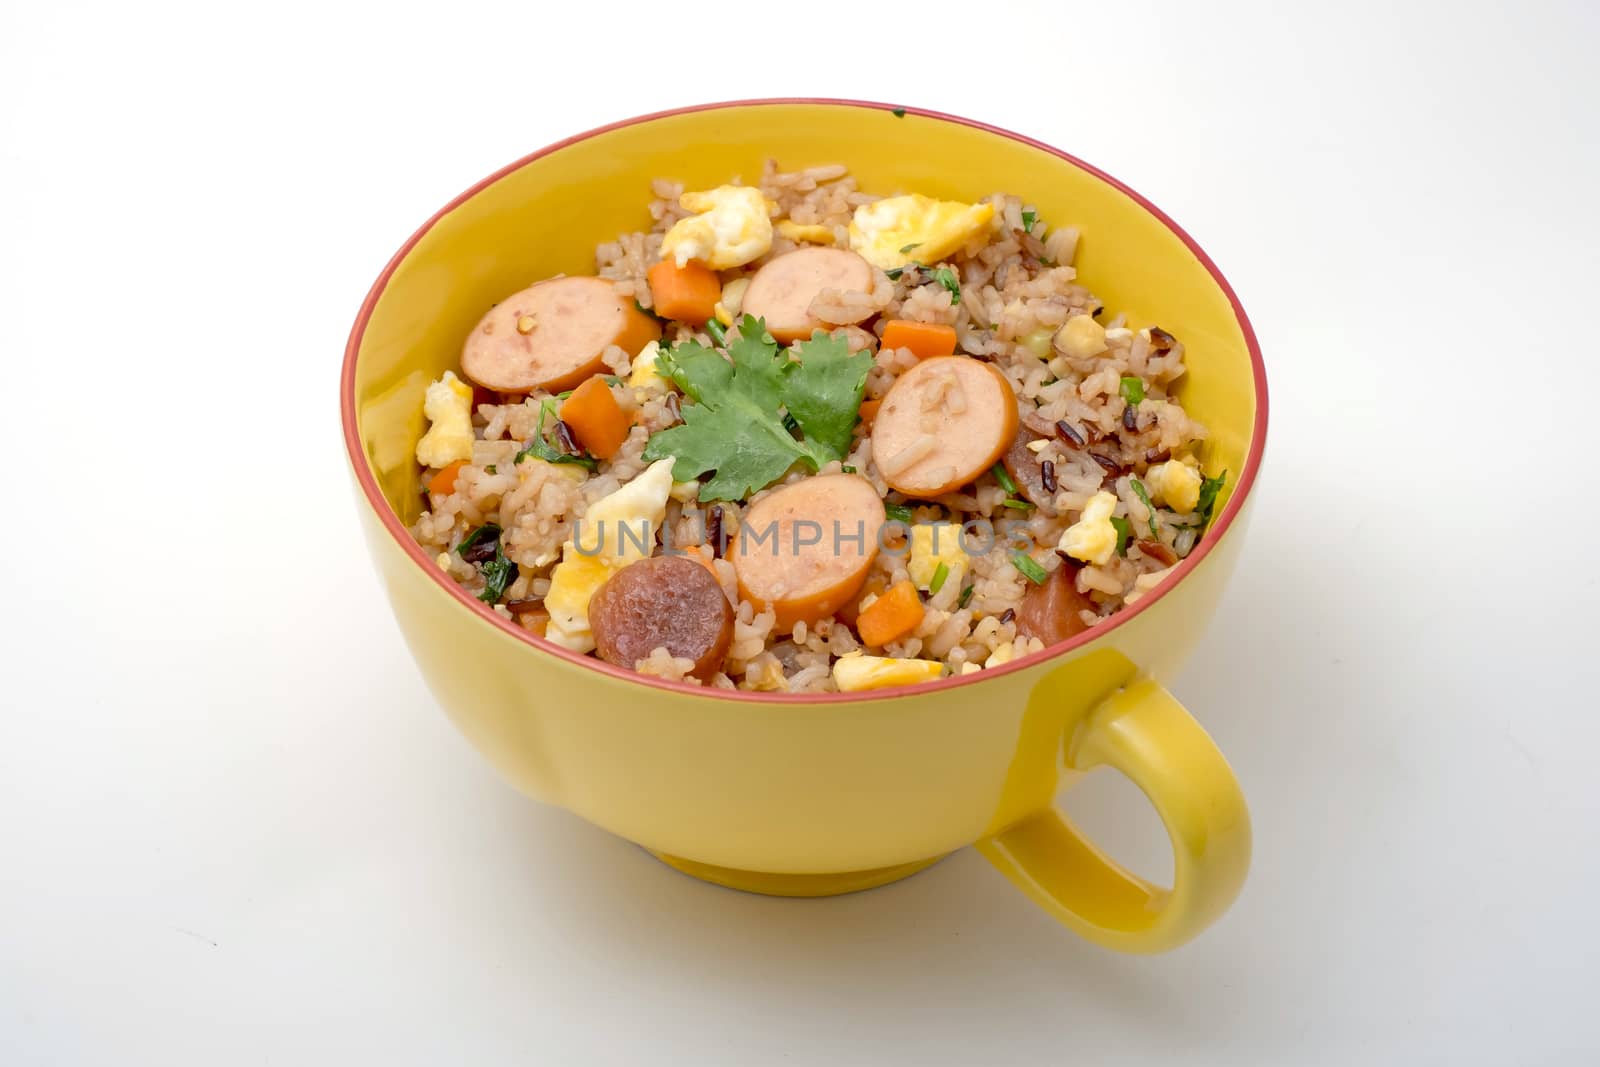 Fried rice with sausage and vegetables on white background by art9858